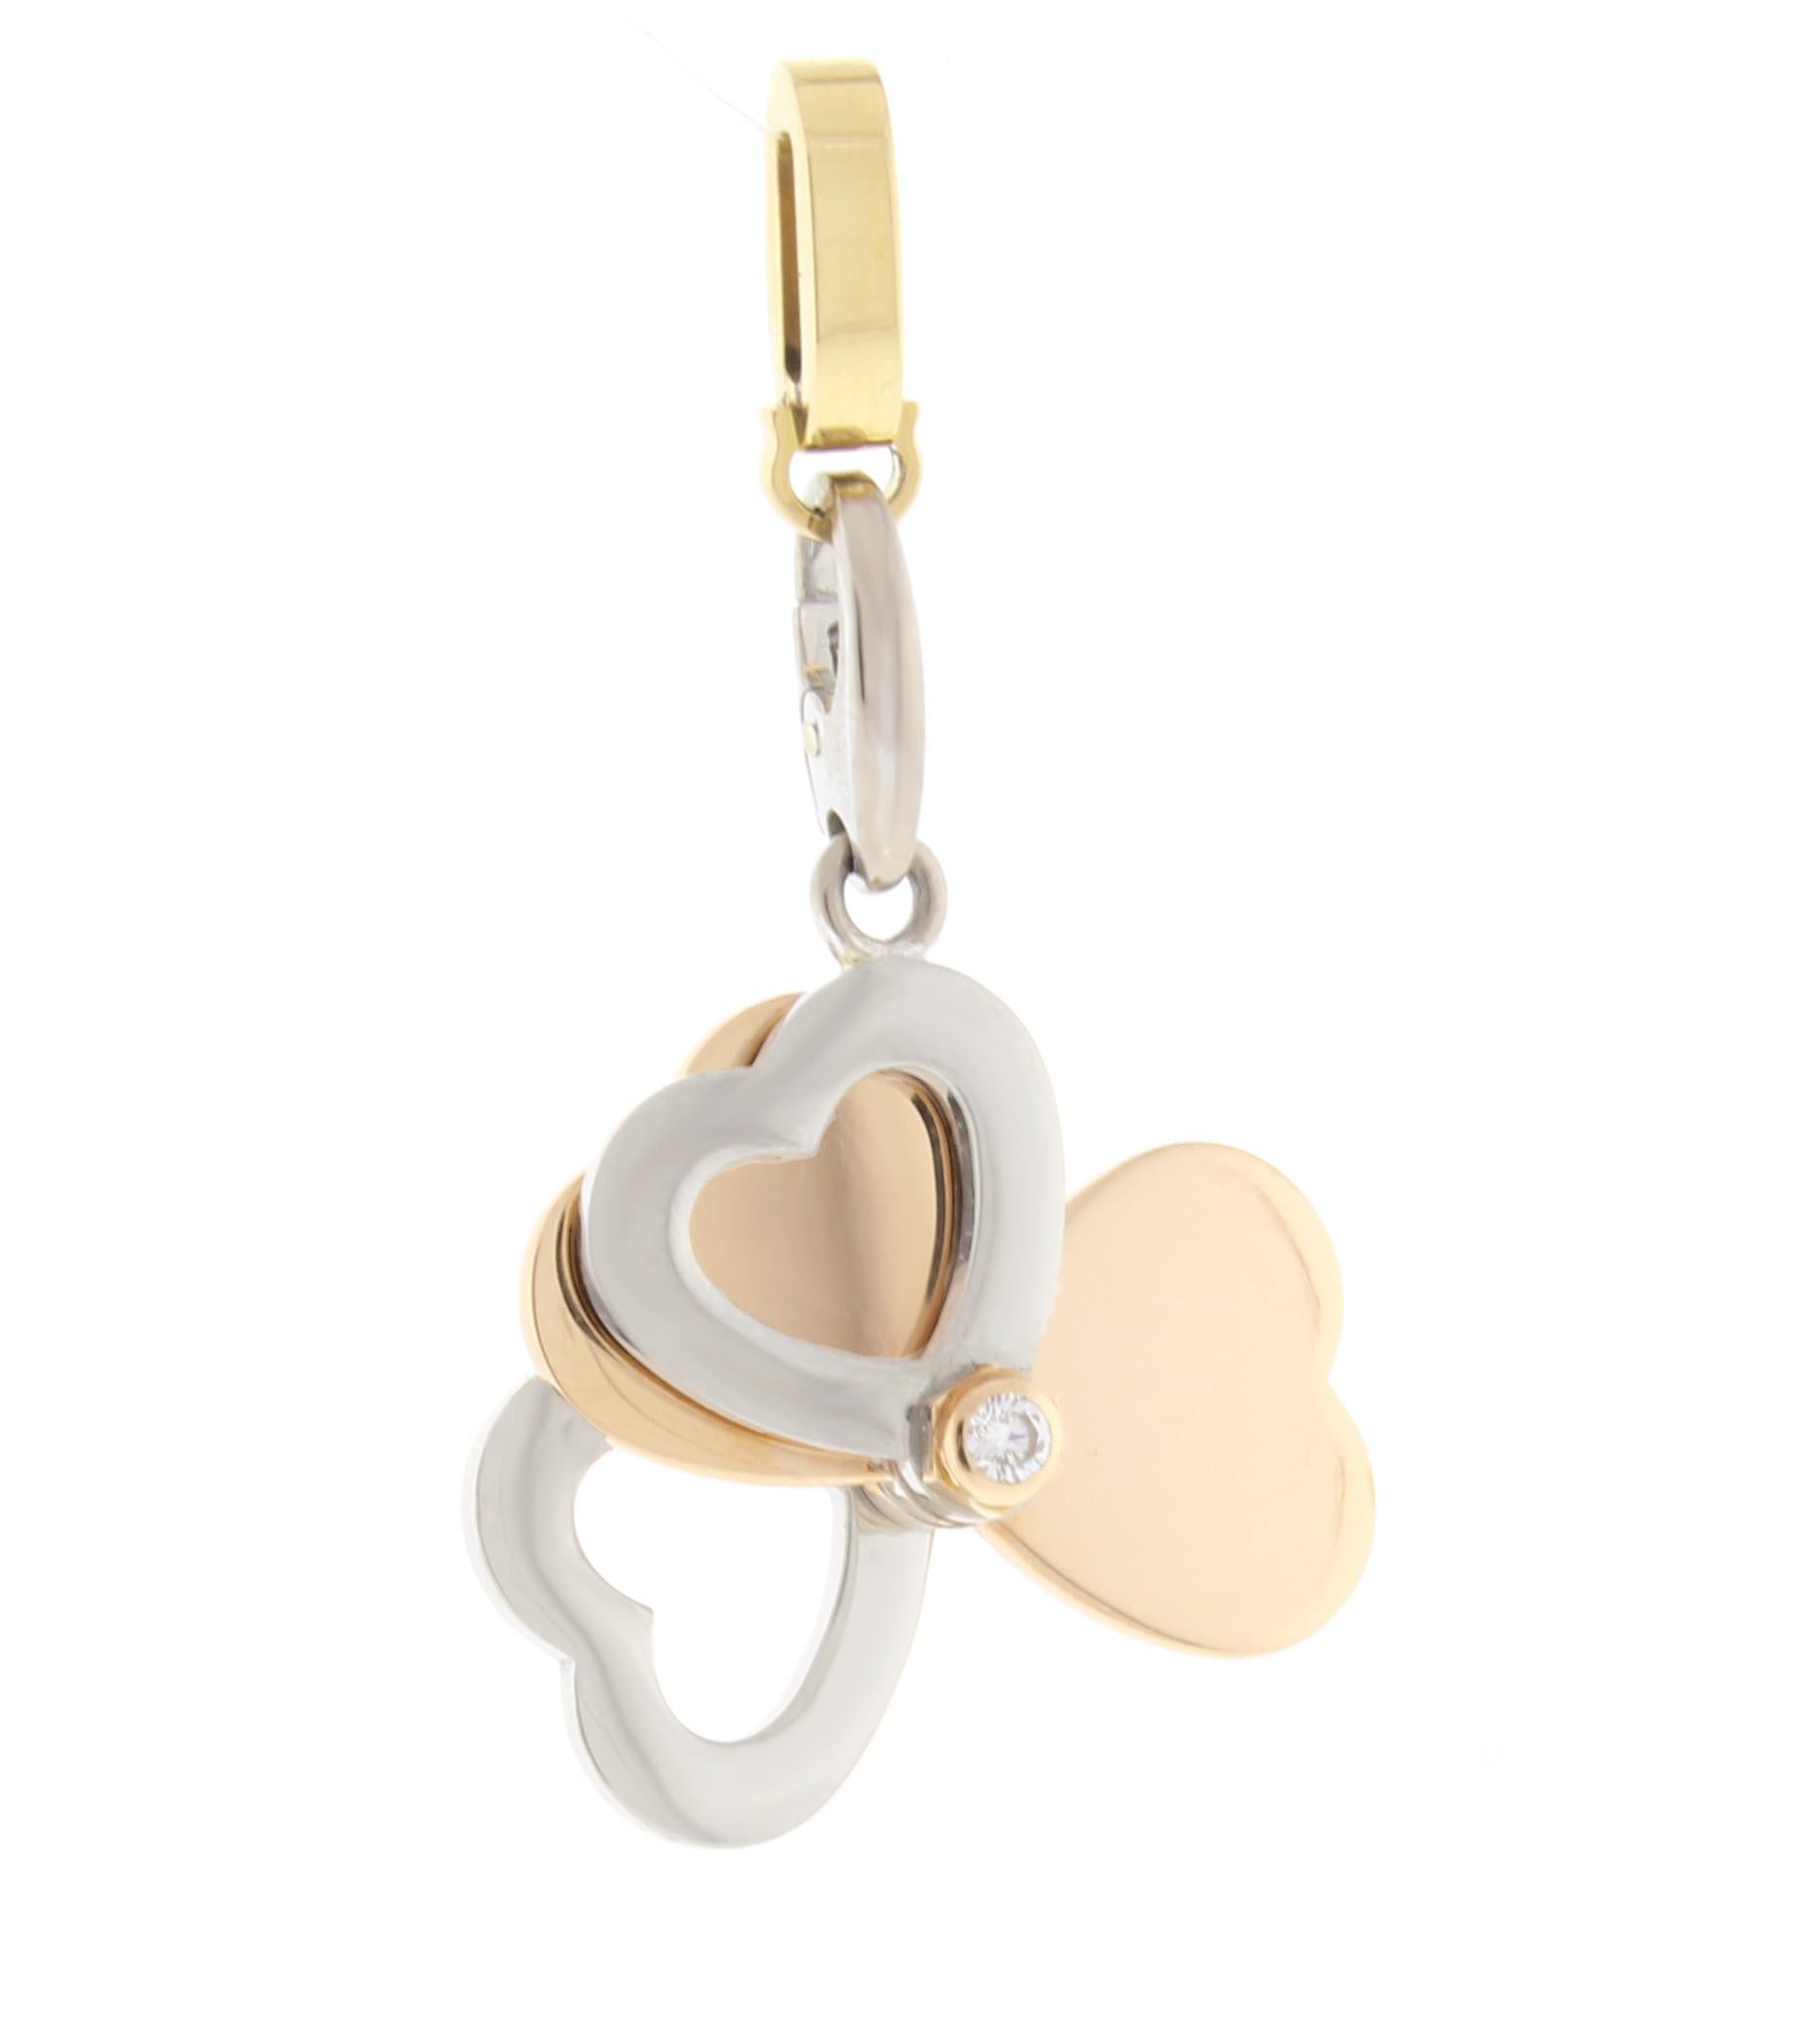 From Cartier thier iconic 18 karat pink, white and yellow gold heart clover charm. The hearts open to form a four leaf clover. Can be worn as a charm or pendant
♦ Designer: Cariter
♦ Metal: 18 karat
♦ 2 Diamonds=.12 carats
♦  1 inch when opened
♦